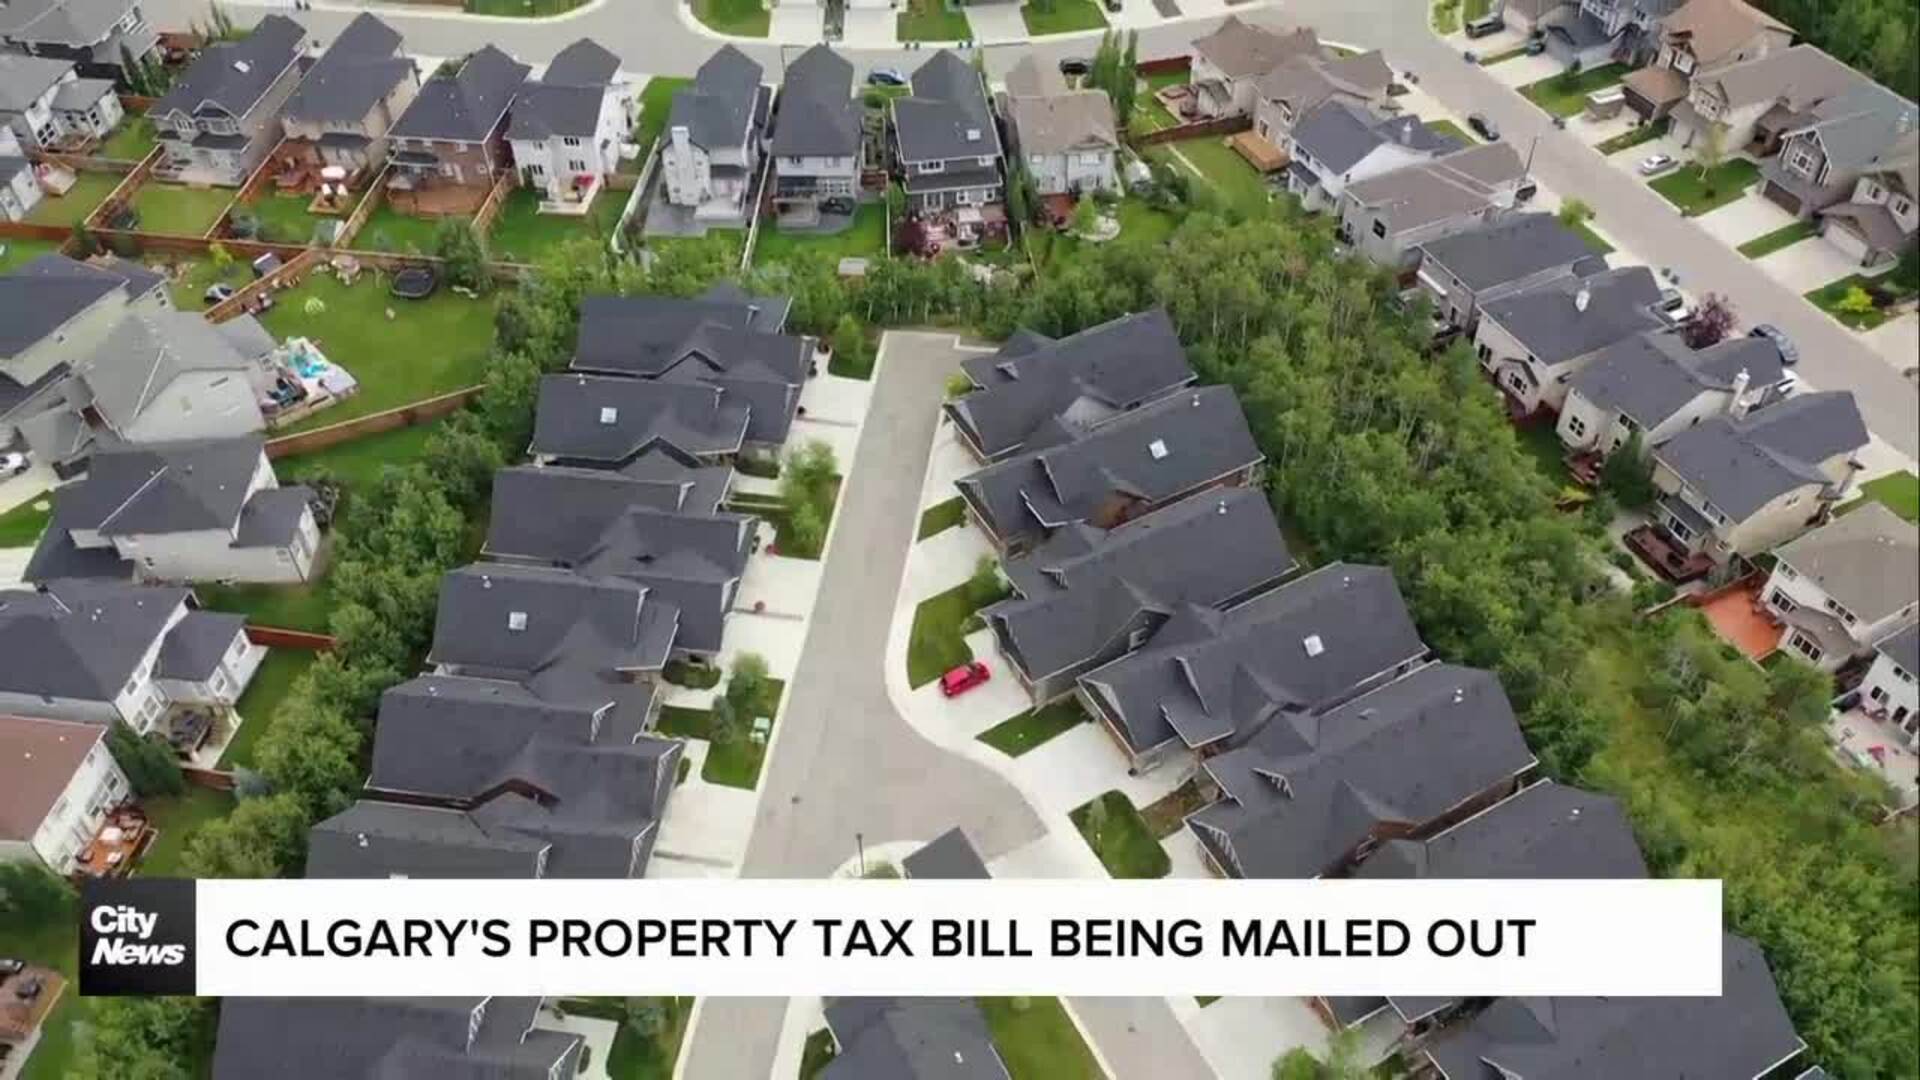 Calgary's property tax bill being mailed out